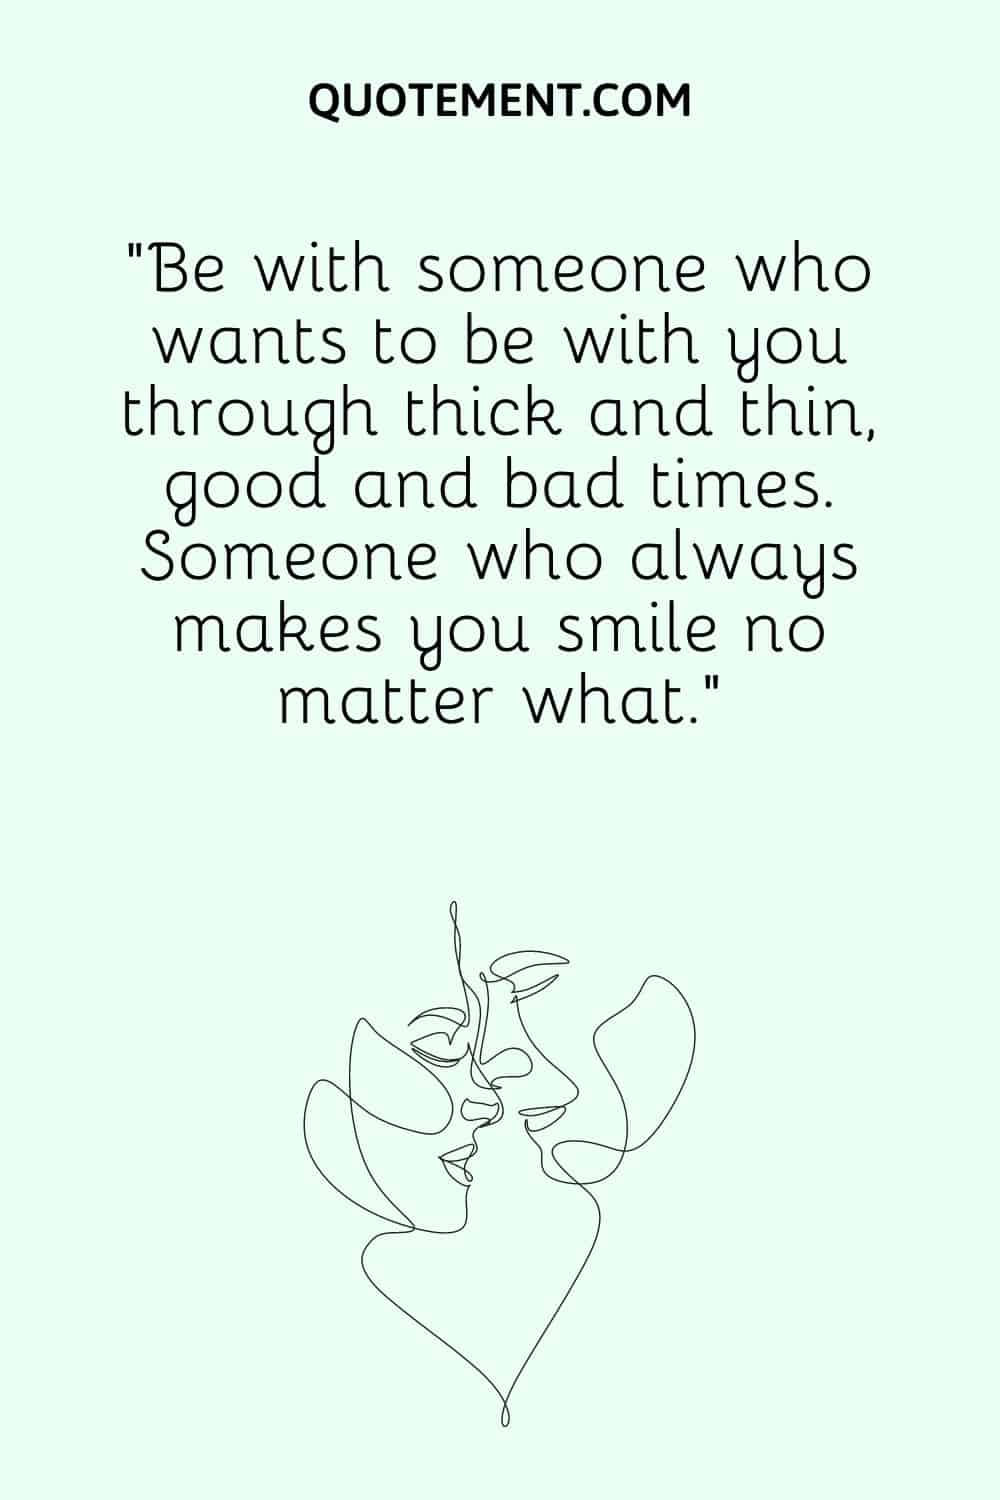 “Be with someone who wants to be with you through thick and thin, good and bad times. Someone who always makes you smile no matter what.”